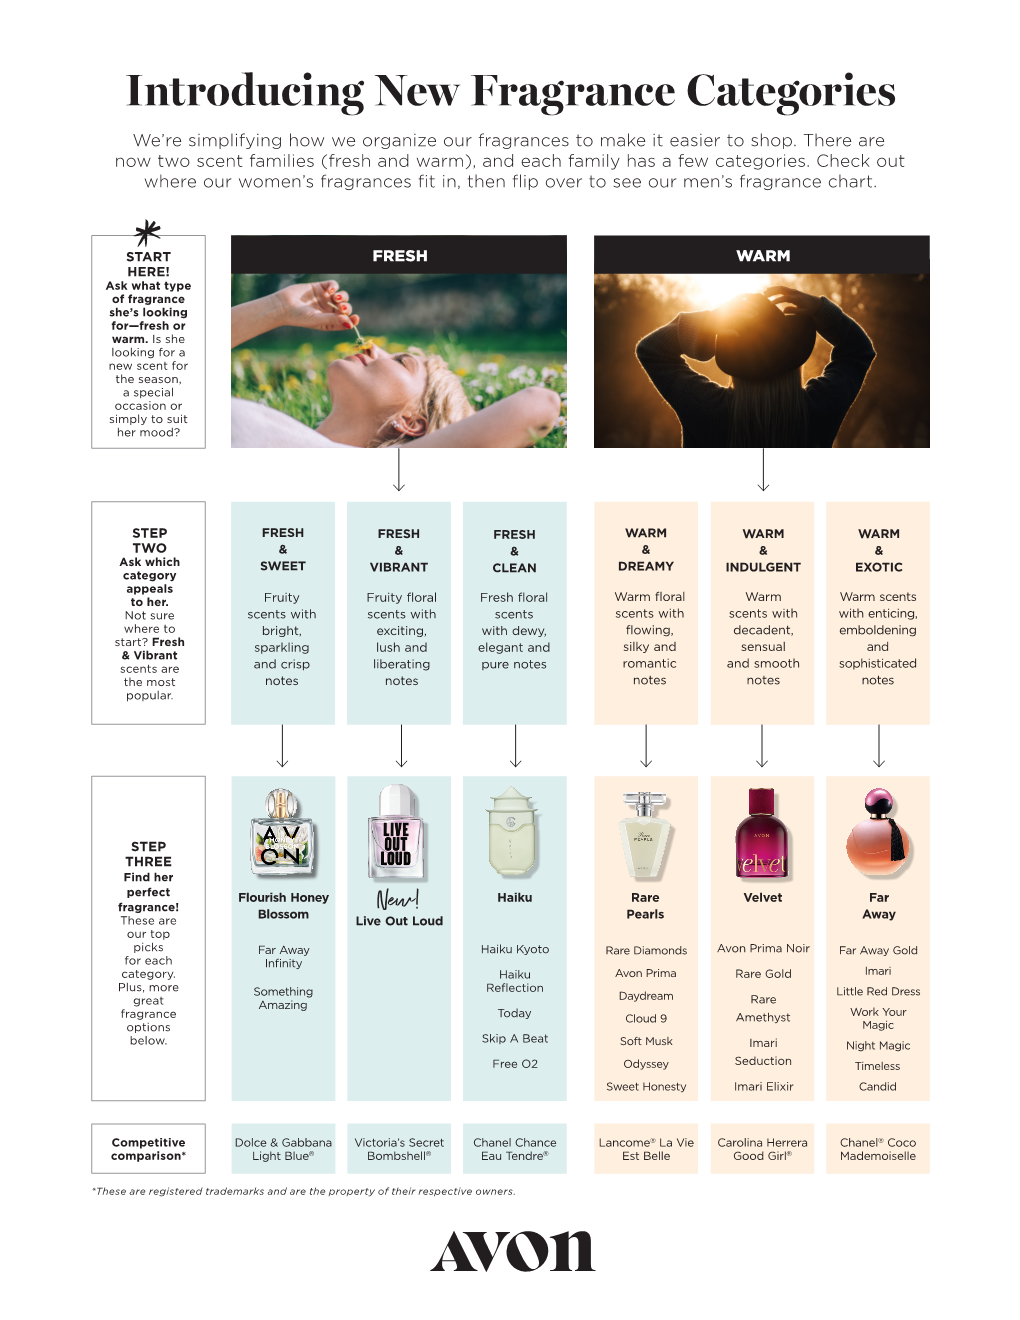 Introducing New Fragrance Categories We’Re Simplifying How We Organize Our Fragrances to Make It Easier to Shop